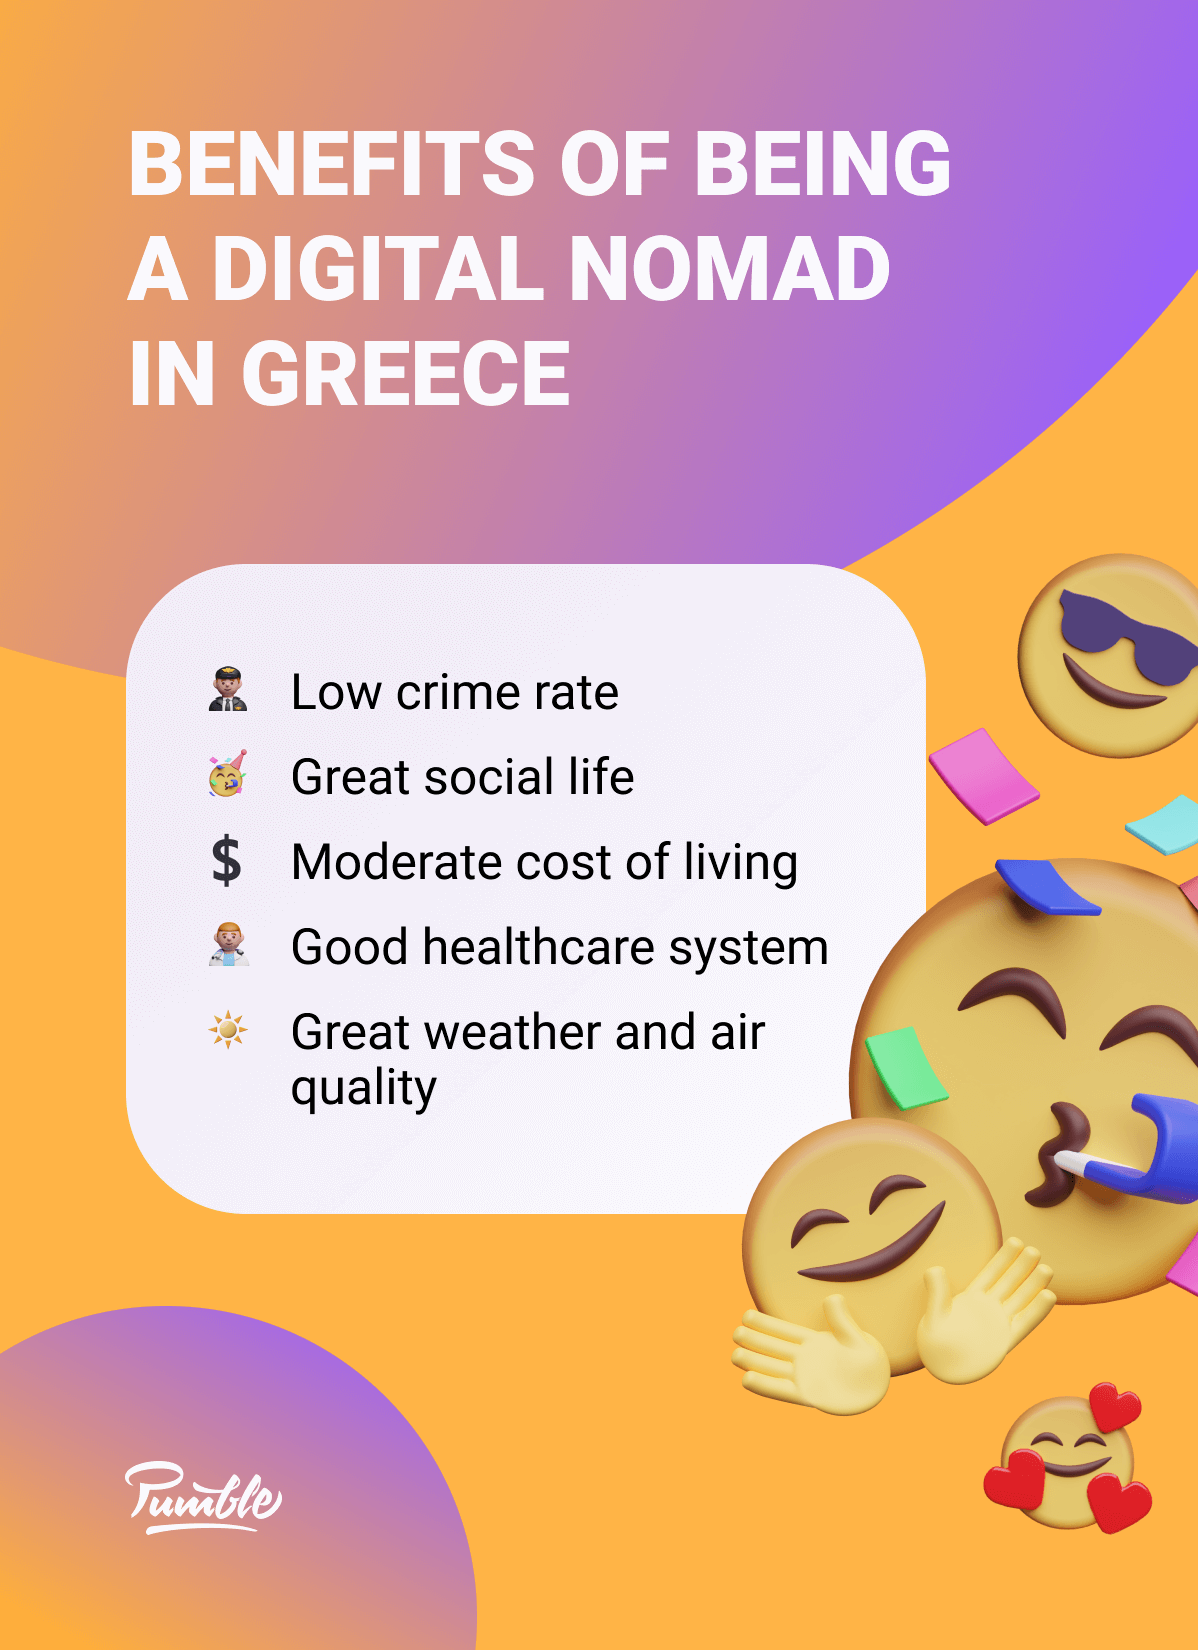 Benefits of being a digital nomad in GREECE